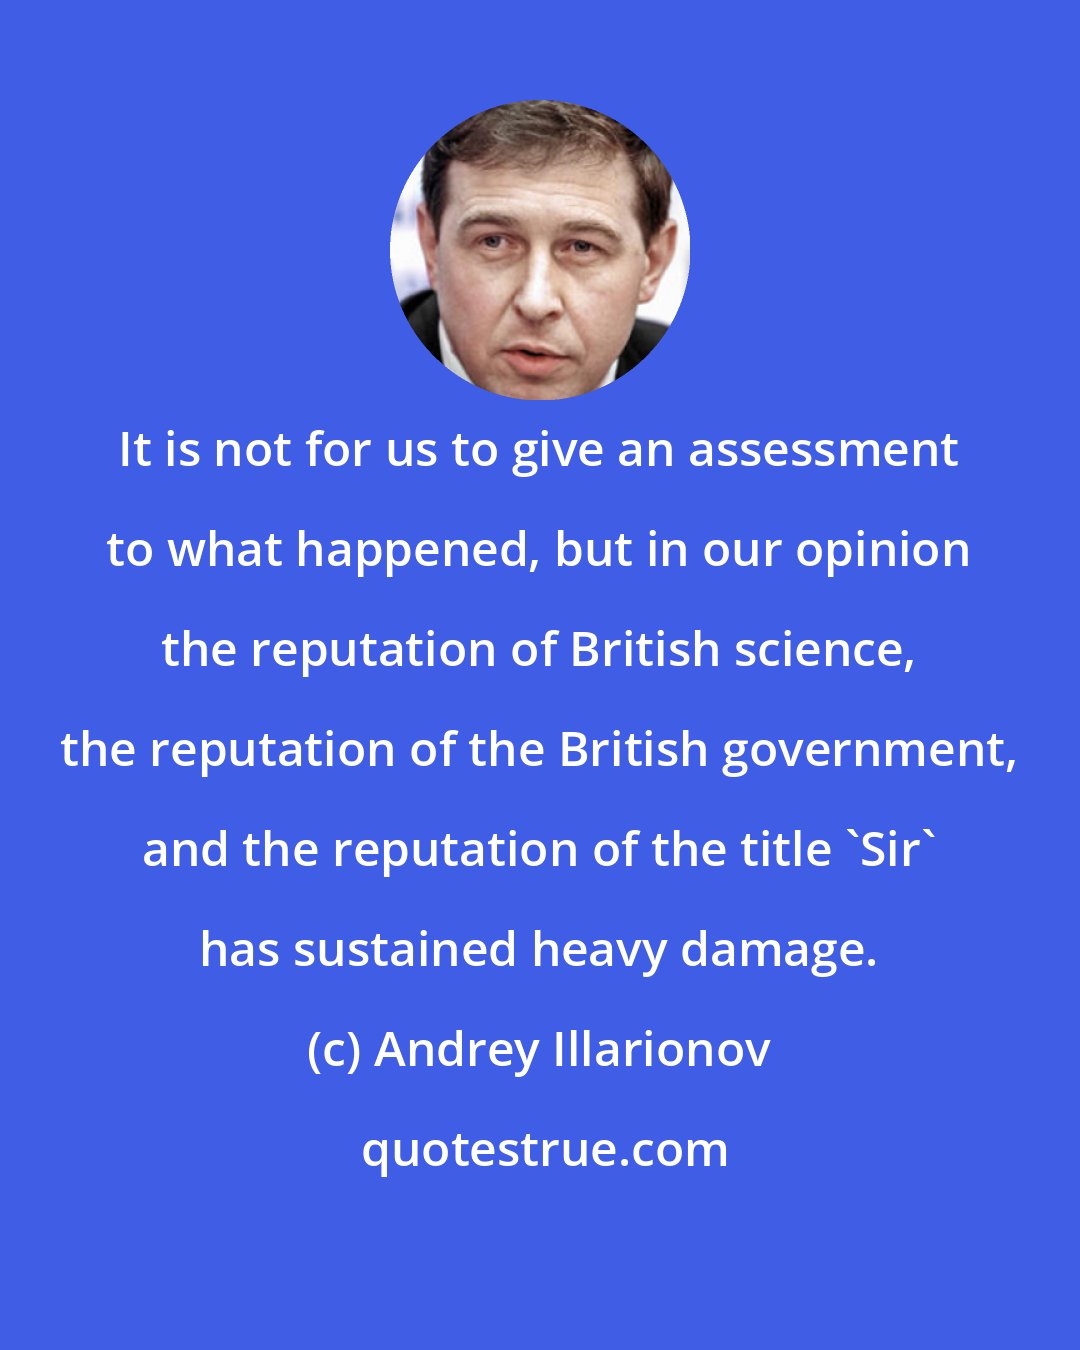 Andrey Illarionov: It is not for us to give an assessment to what happened, but in our opinion the reputation of British science, the reputation of the British government, and the reputation of the title 'Sir' has sustained heavy damage.